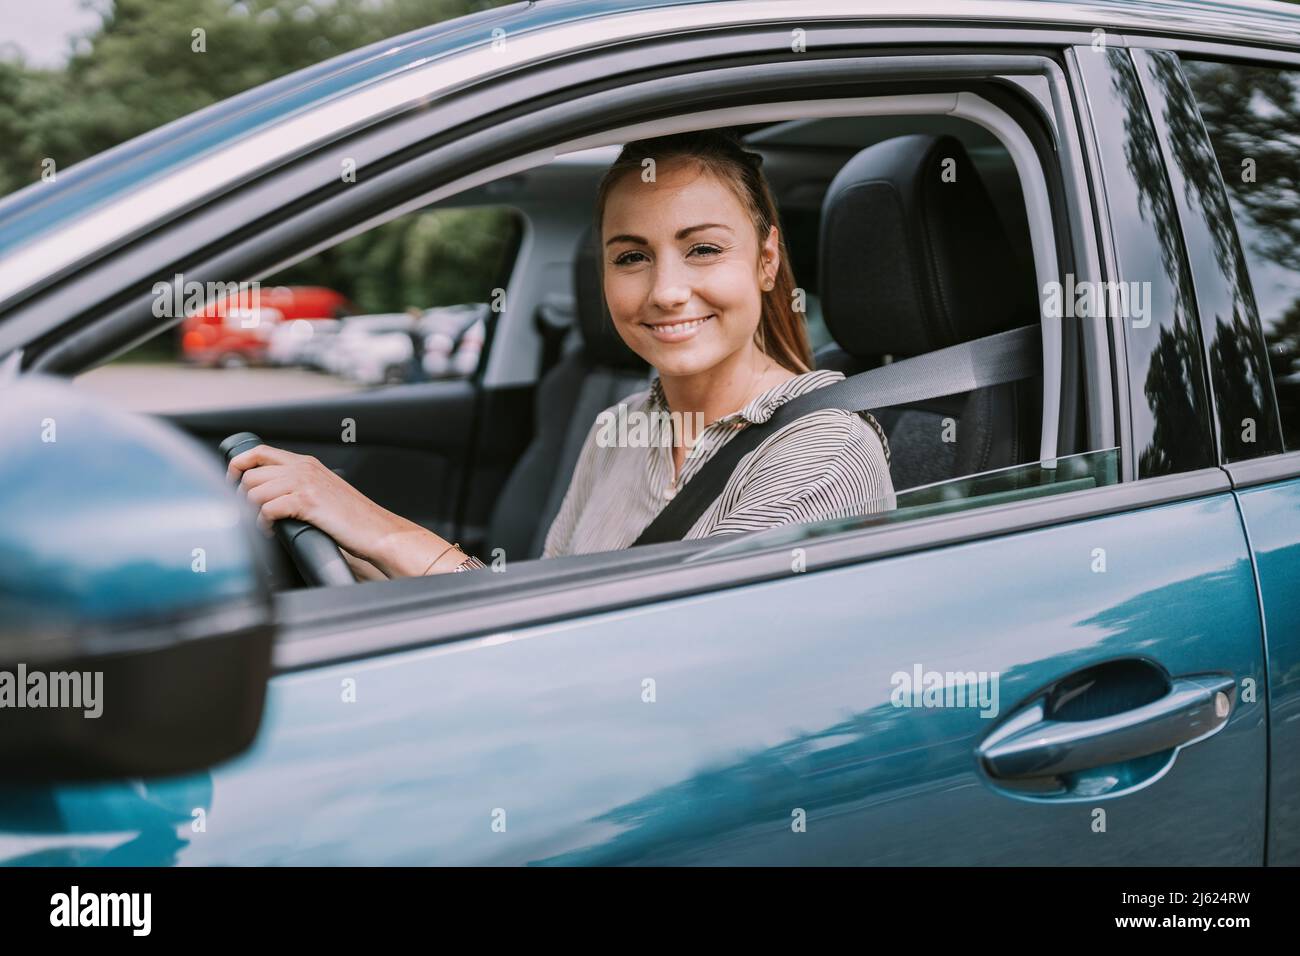 Smiling young woman looking through car window Stock Photo